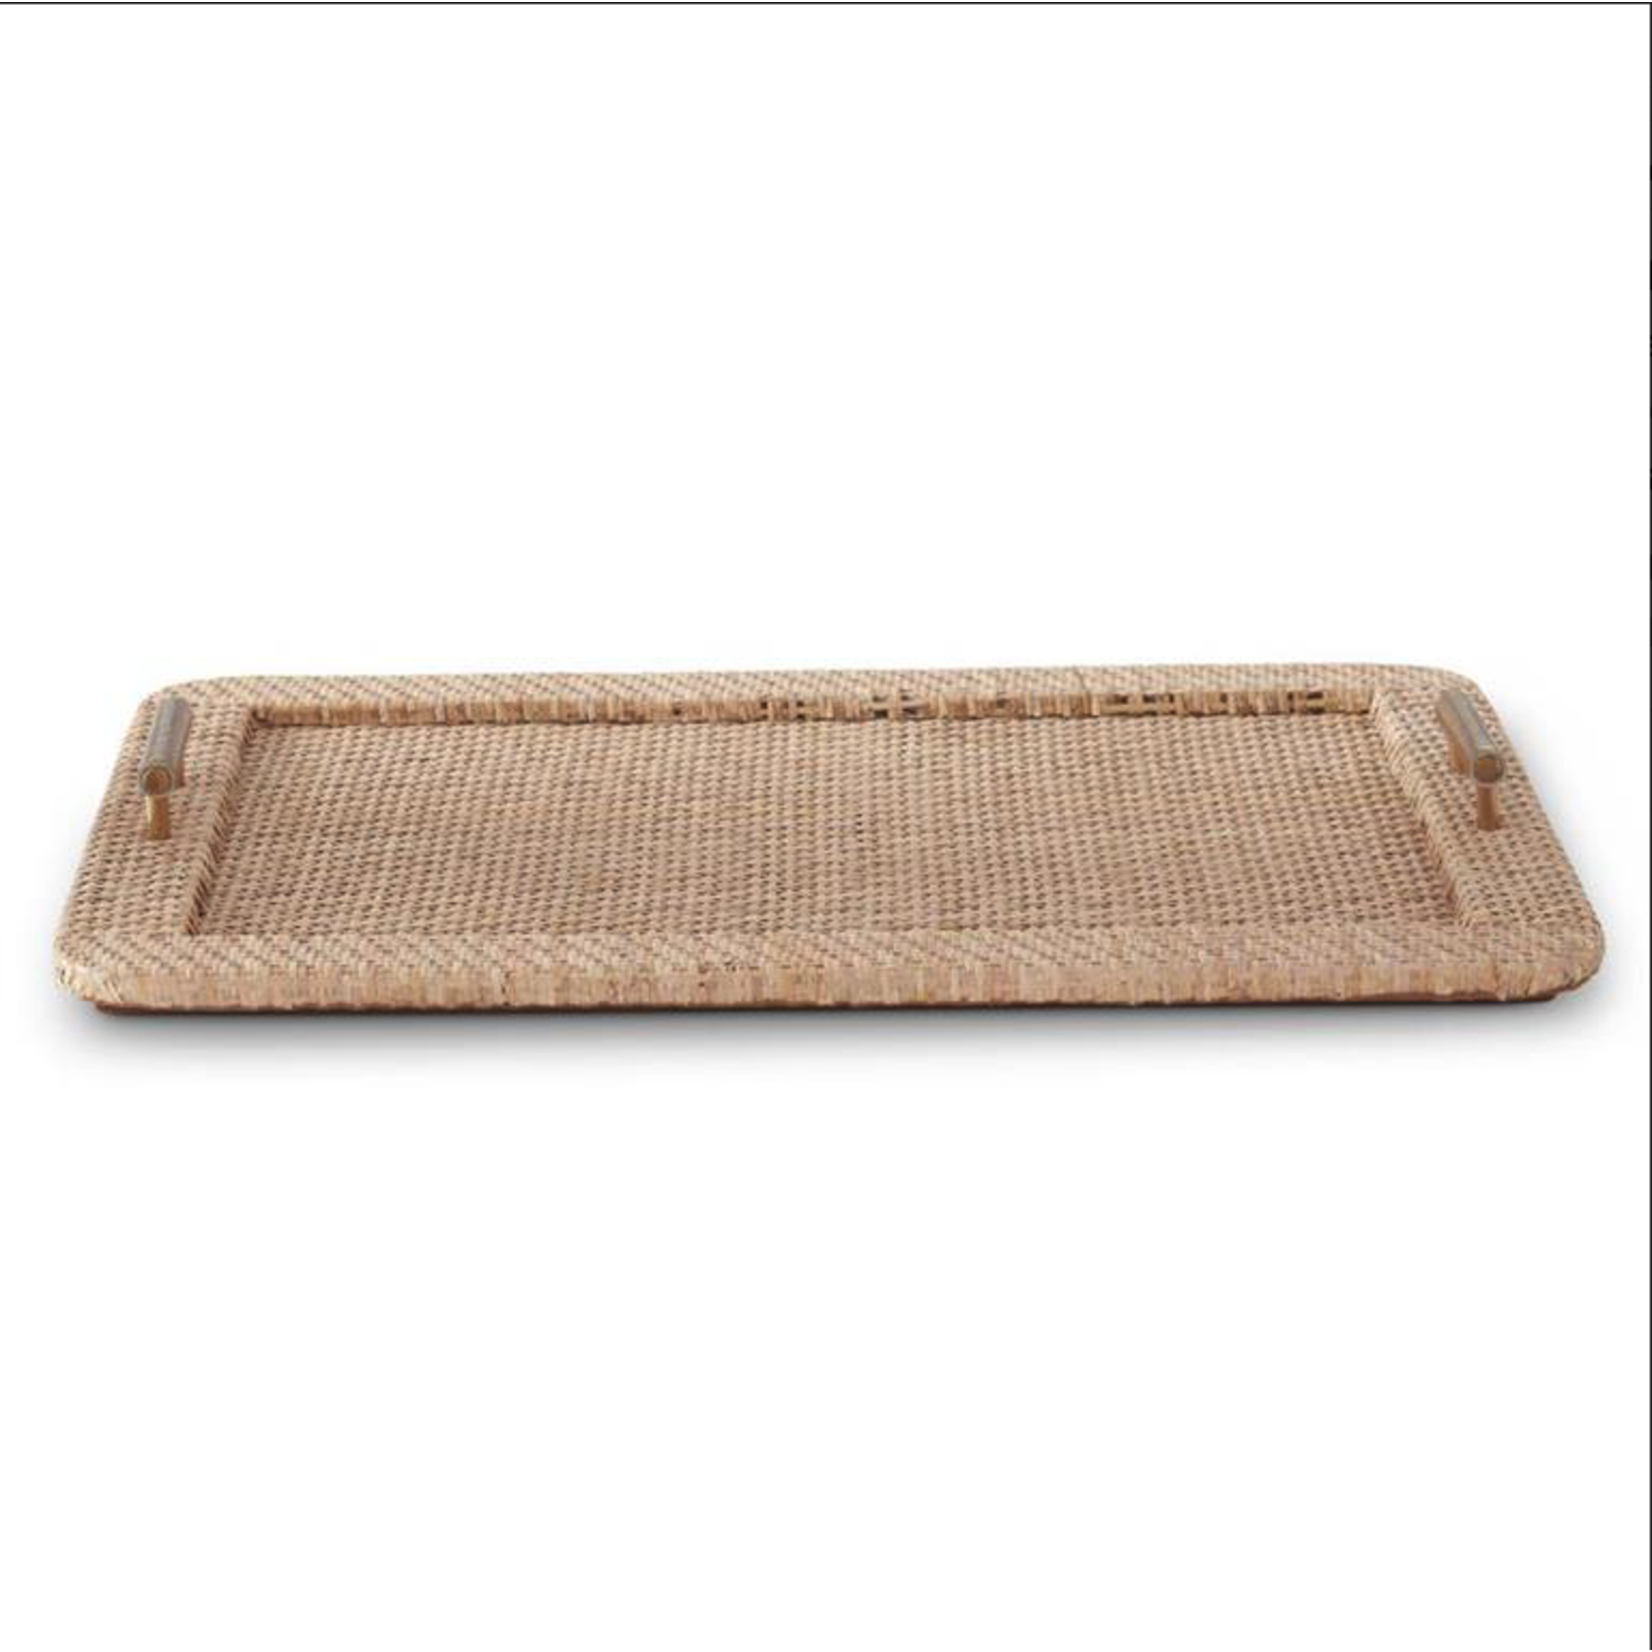 Outside The Box 23x18 Natural Rattan Weave Tray With Brass Handle & Leather Bottom